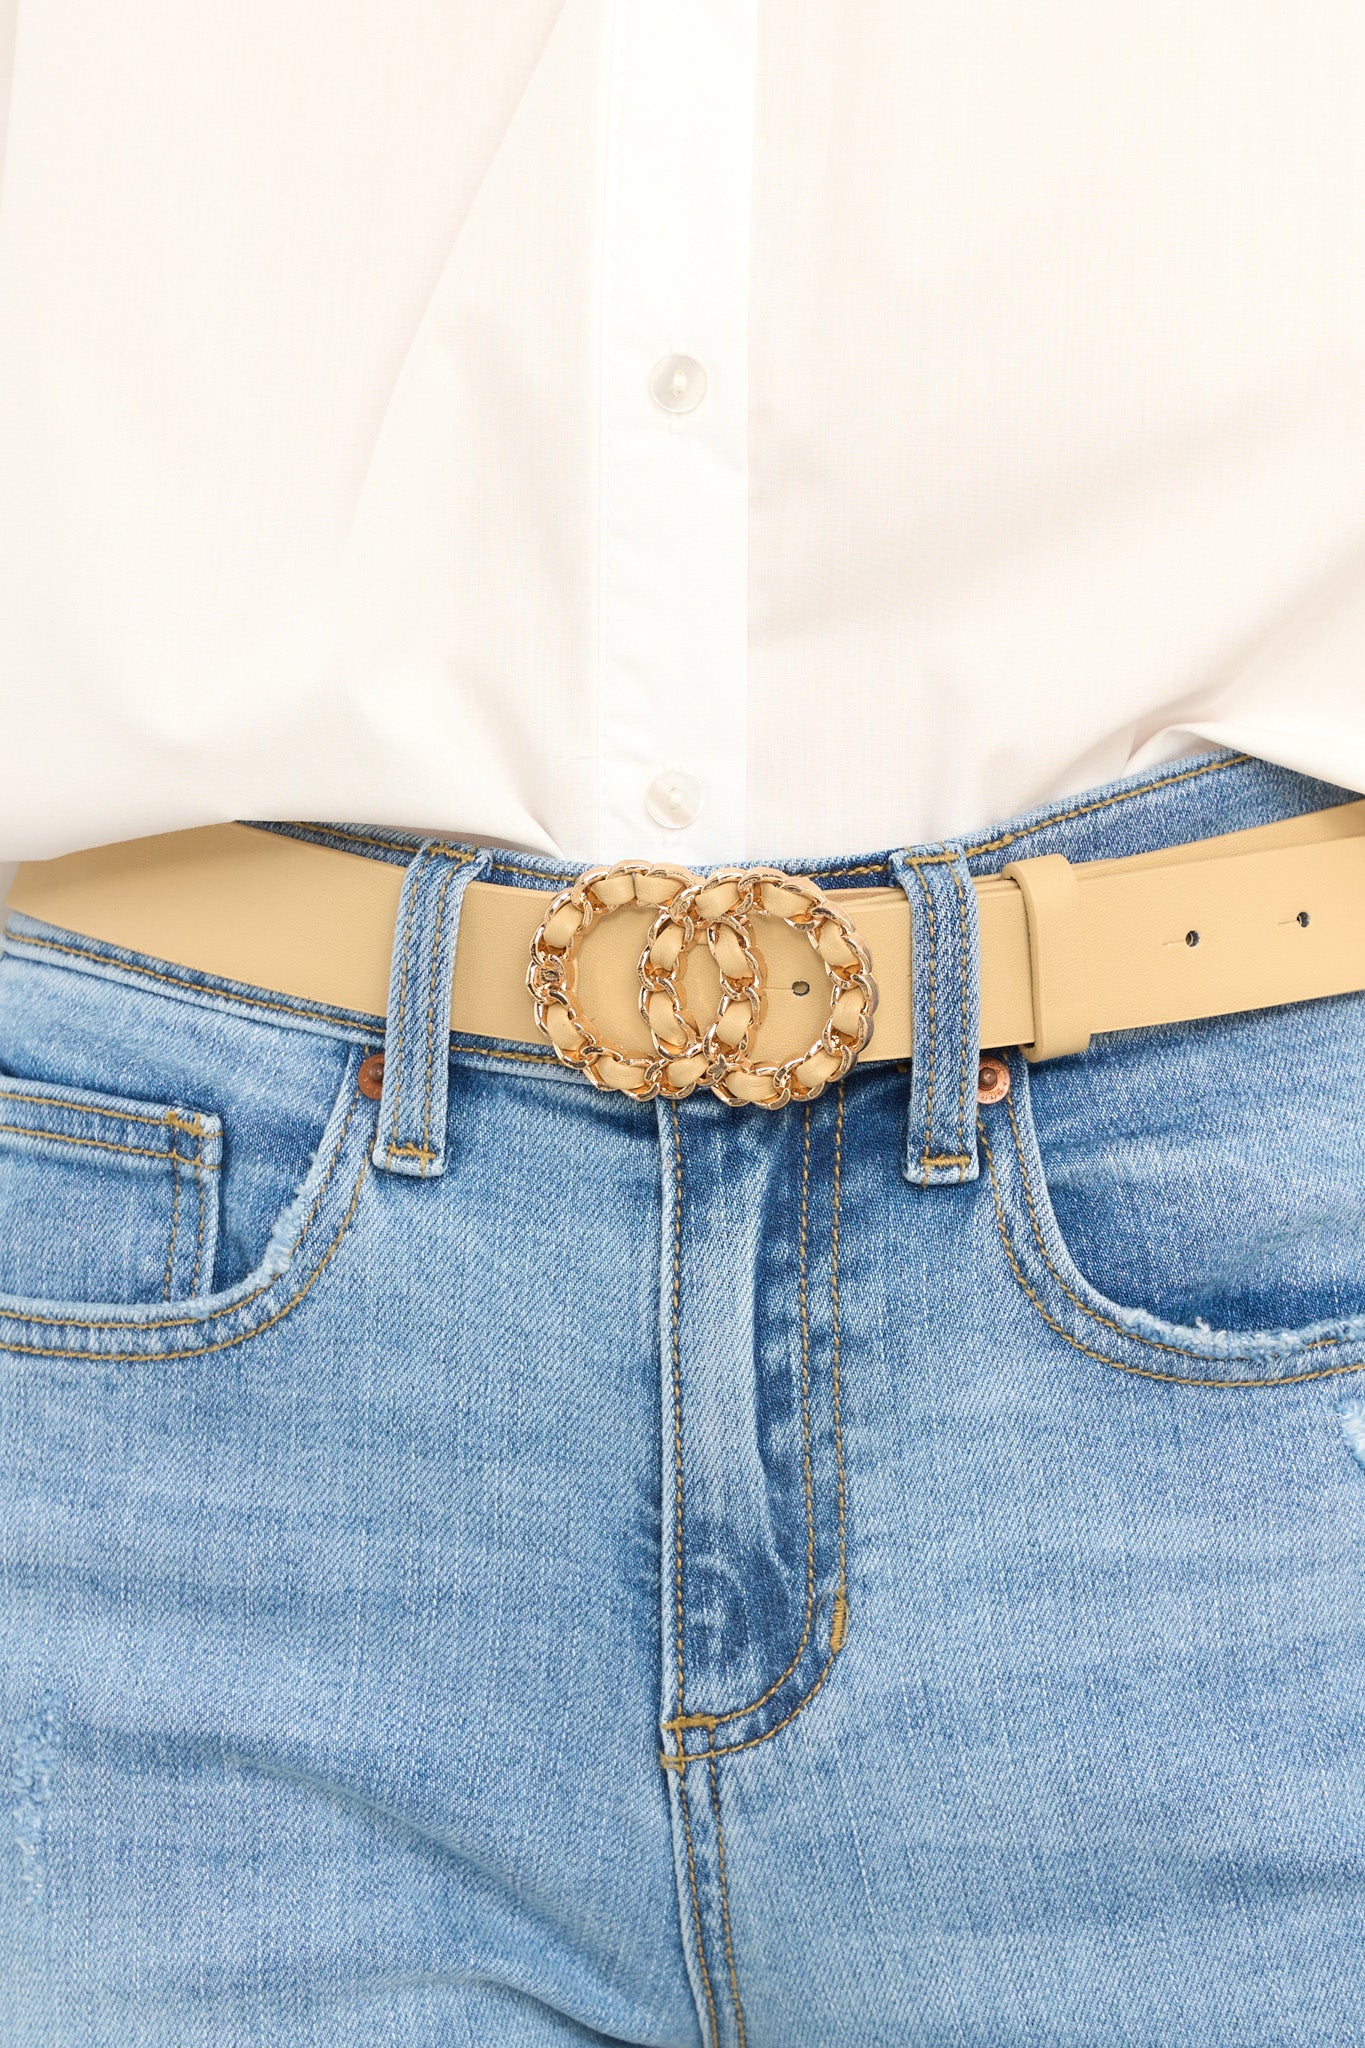 Front view of this belt that features gold hardware, and a double hoop buckle closure.